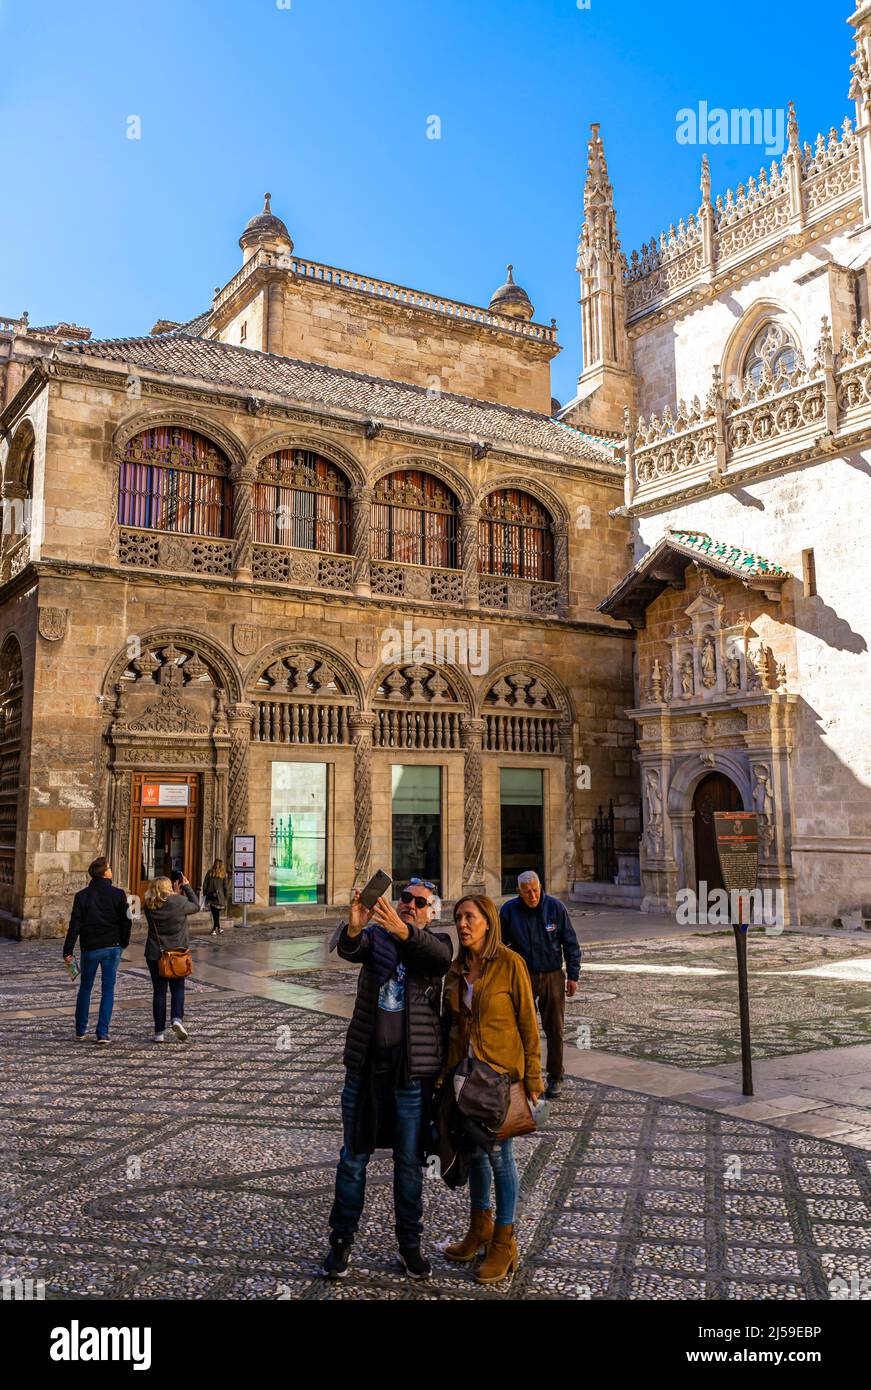 Tourists take picture in front of historic landmark in Granada - Royal Chapel of Granada, Andalucia, Spain Stock Photo